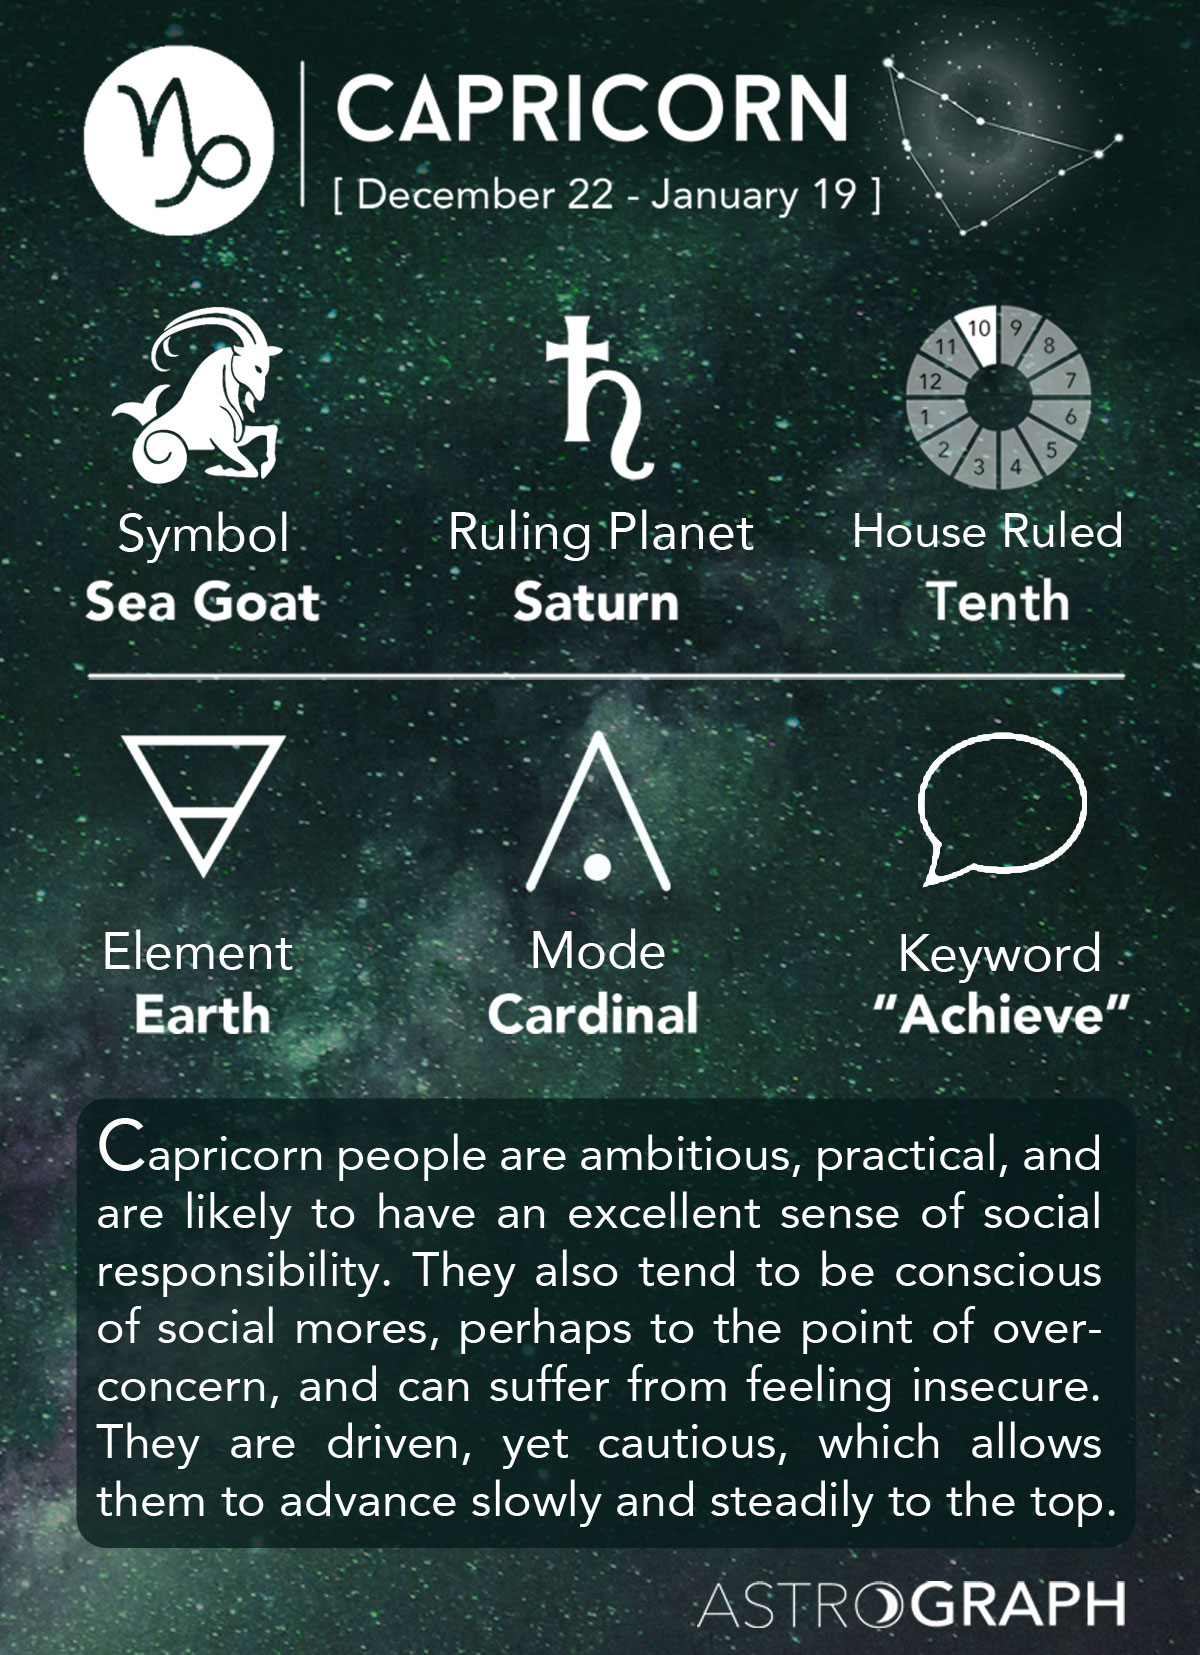 What element is a Capricorn?